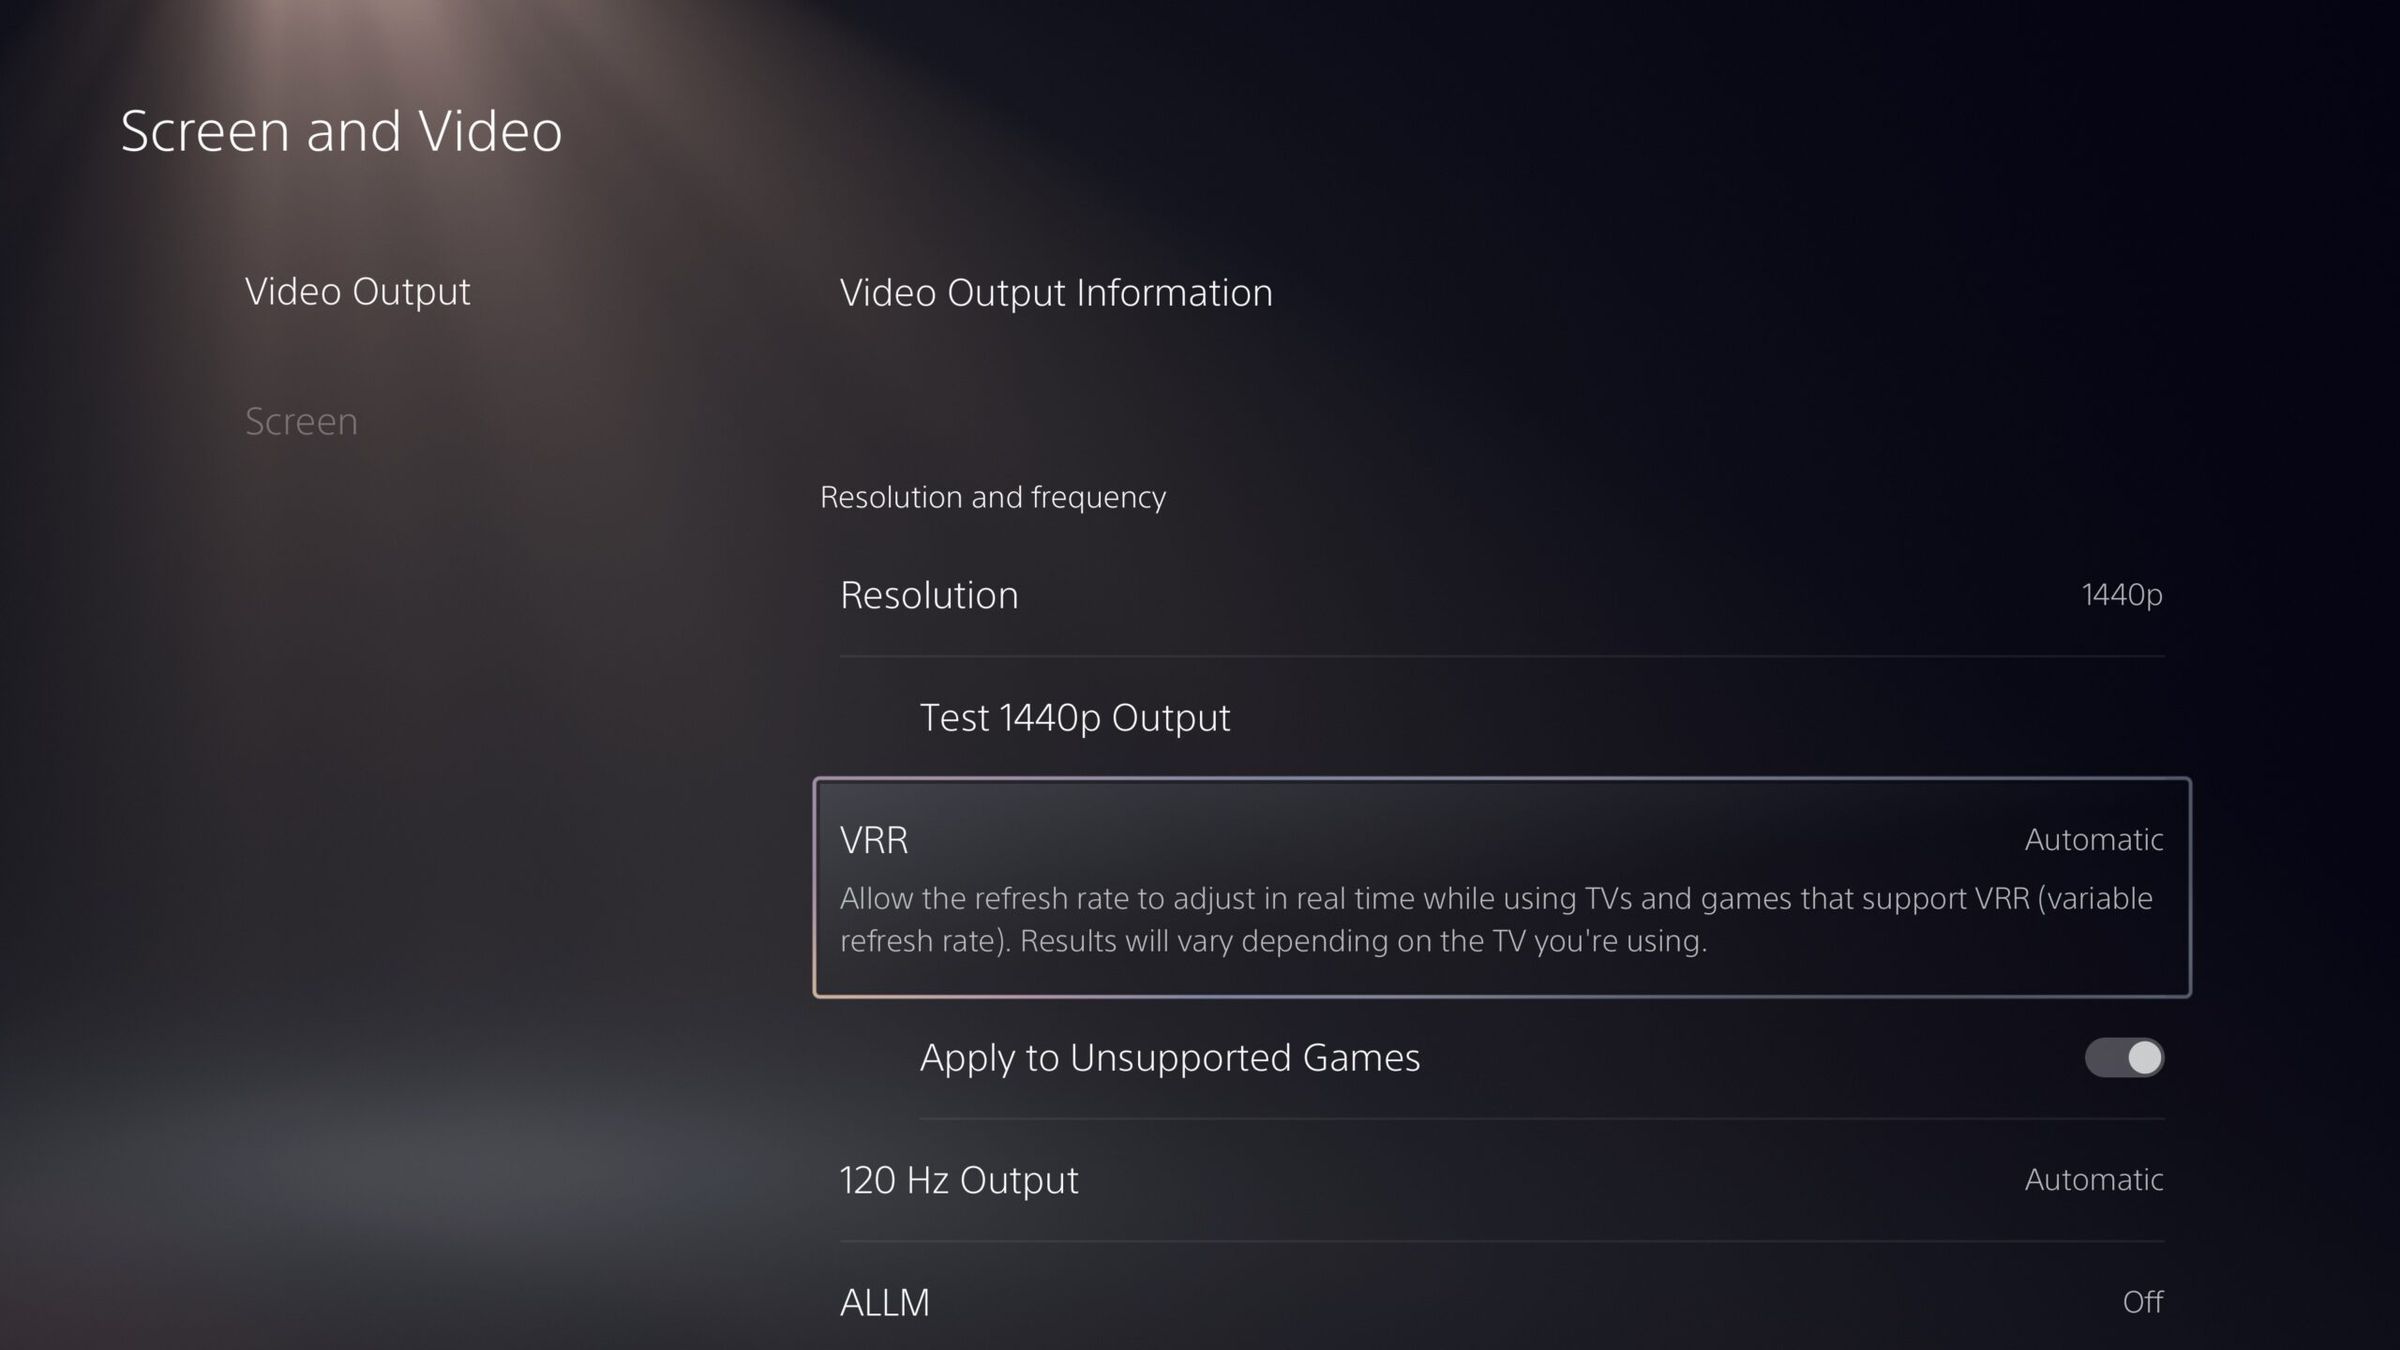 The PS5 gets VRR support for 1440p resolution.